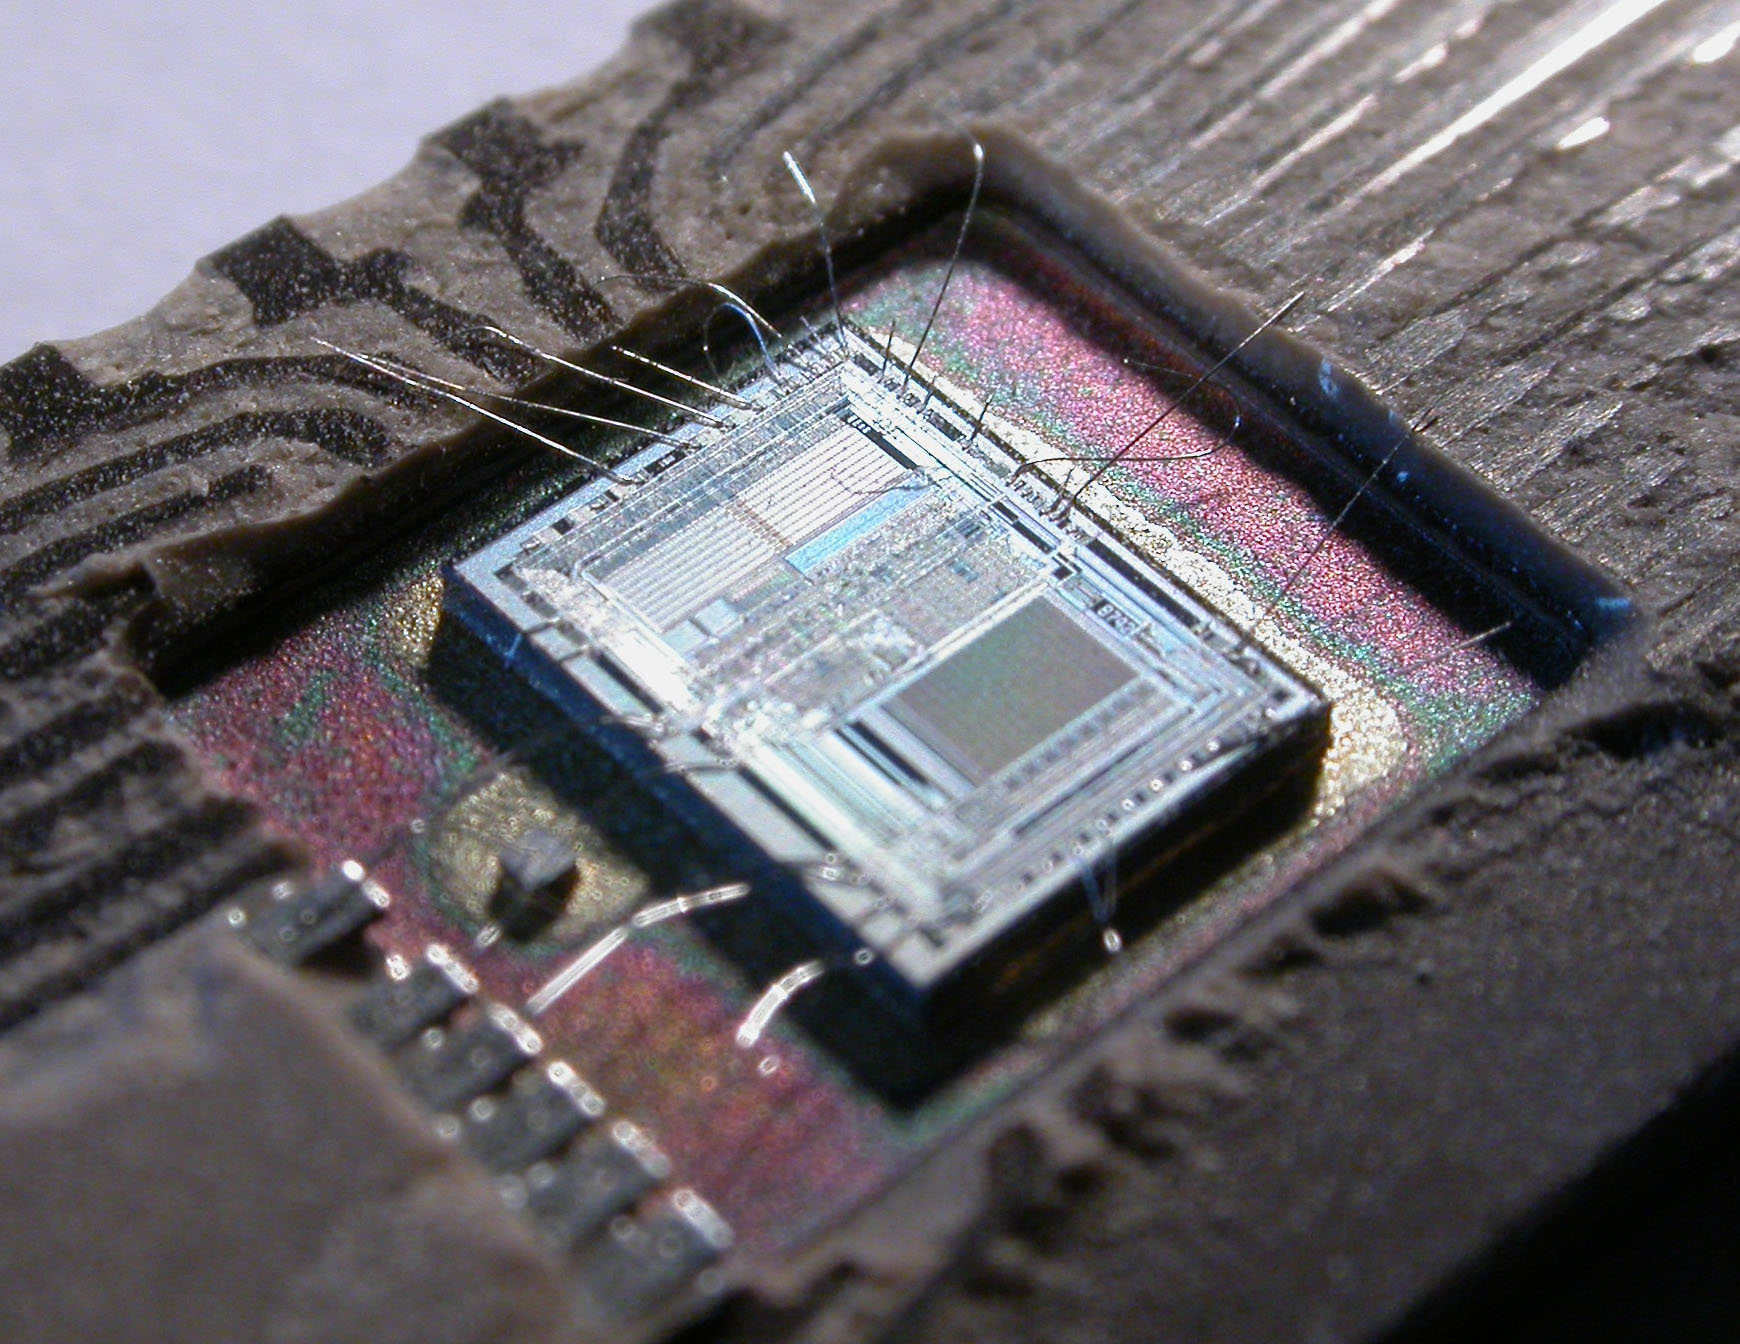 Inside the Circuitry: Understanding the Inner Workings of Your Electronics